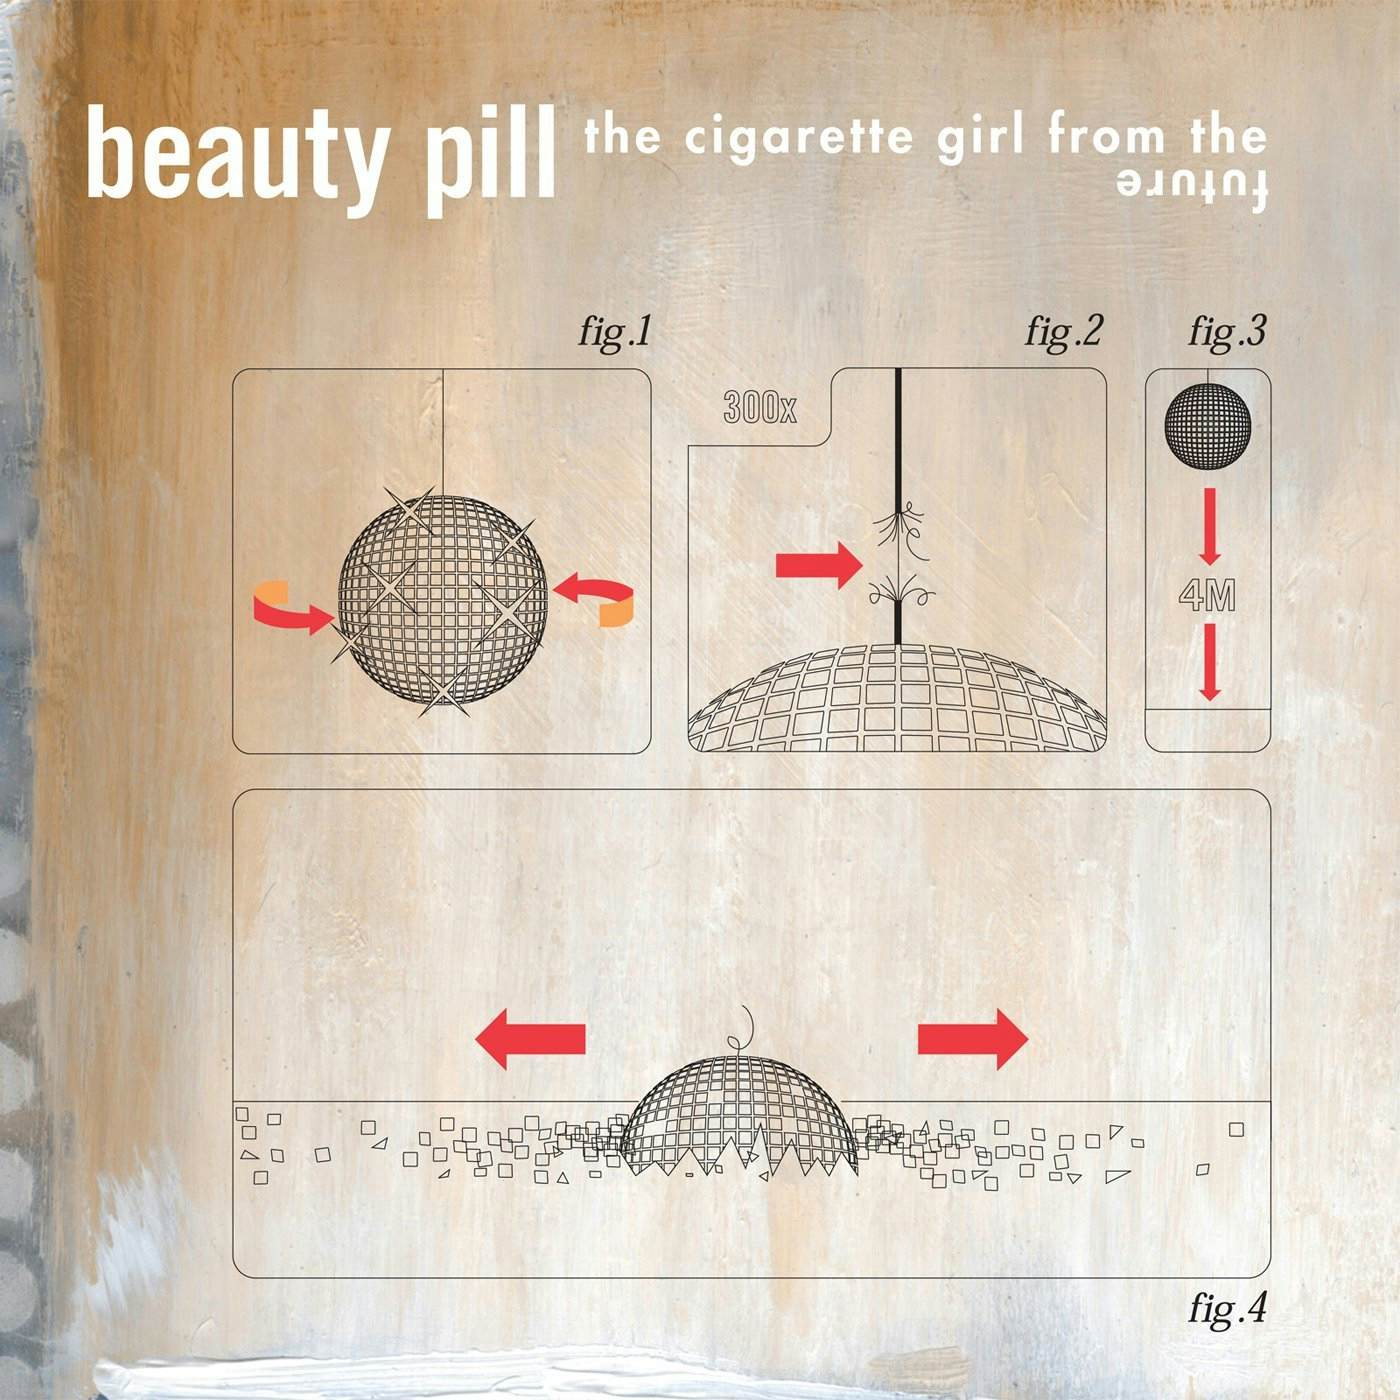 Beauty Pill CIGARETTE GIRL FROM THE FUTURE Vinyl Record - Gatefold Sleeve, Deluxe Edition, Reissue